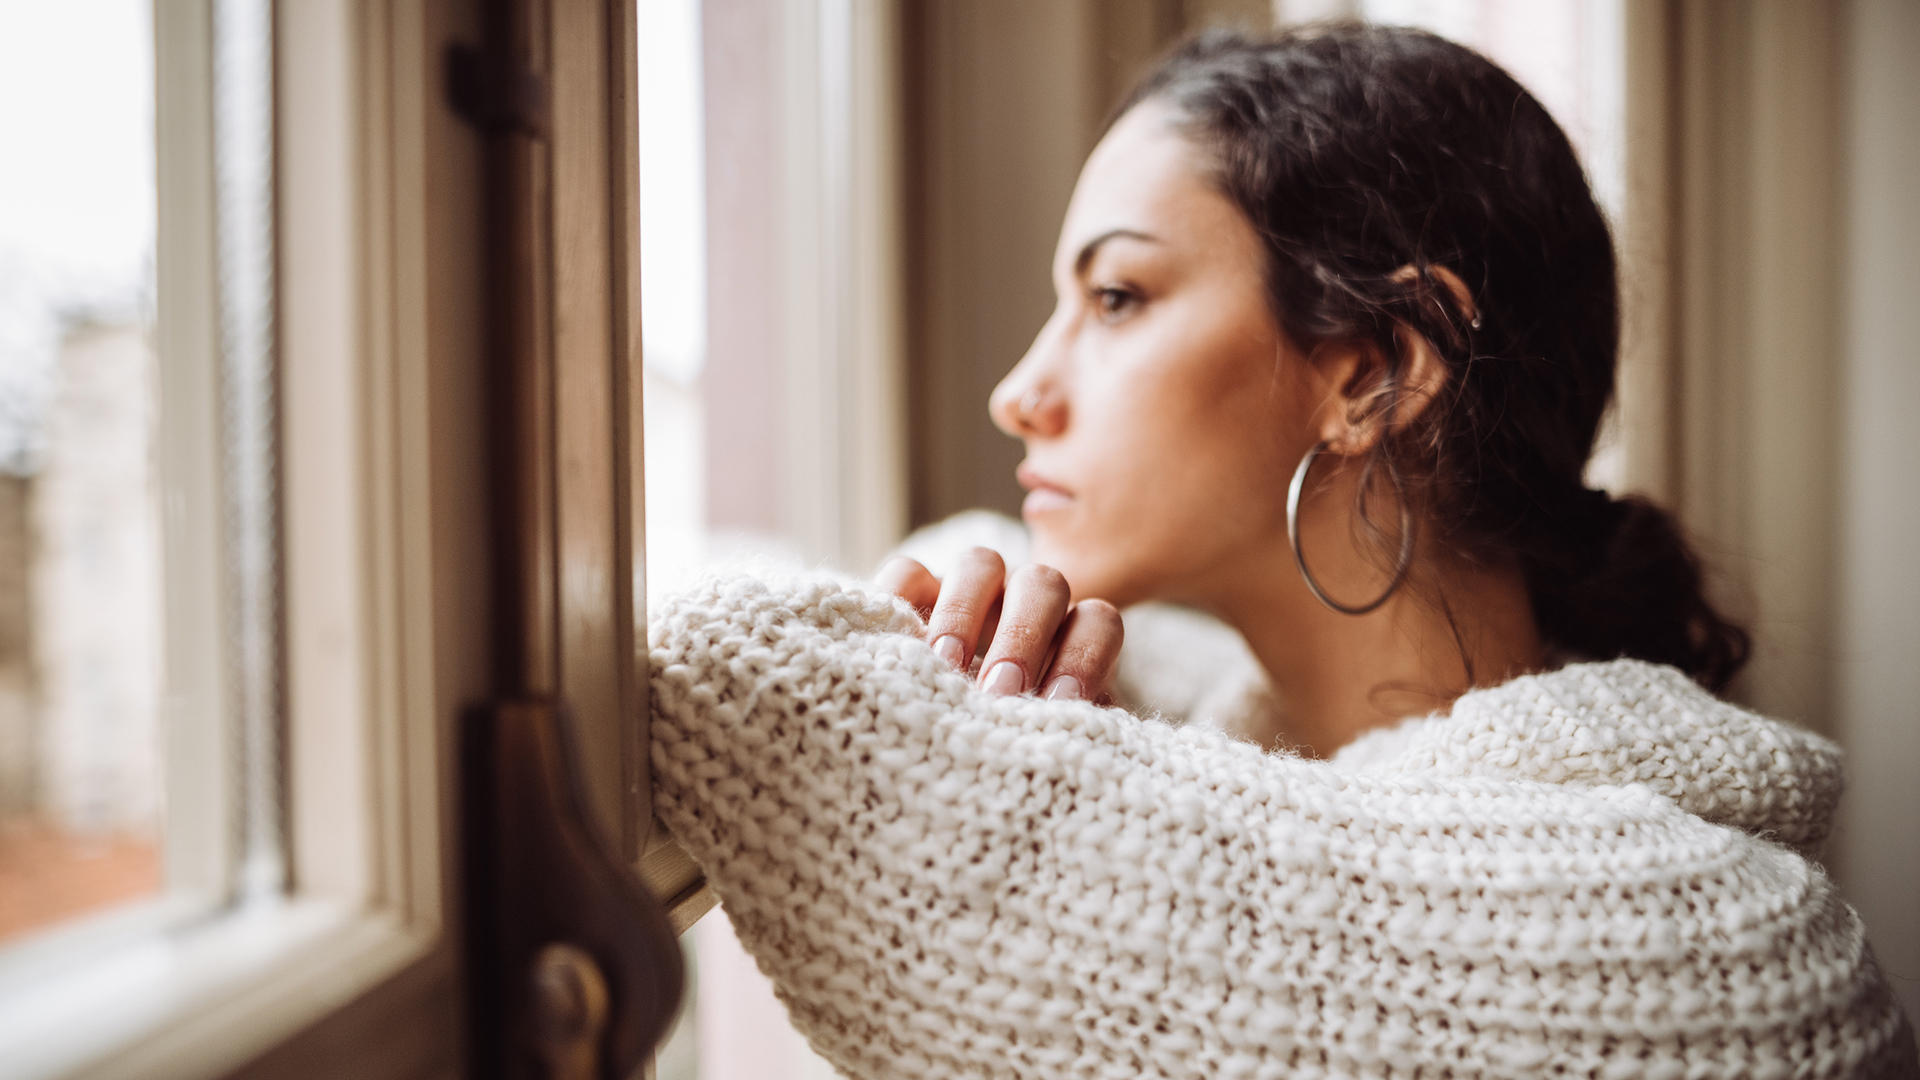 Woman struggling with depression looking out the window